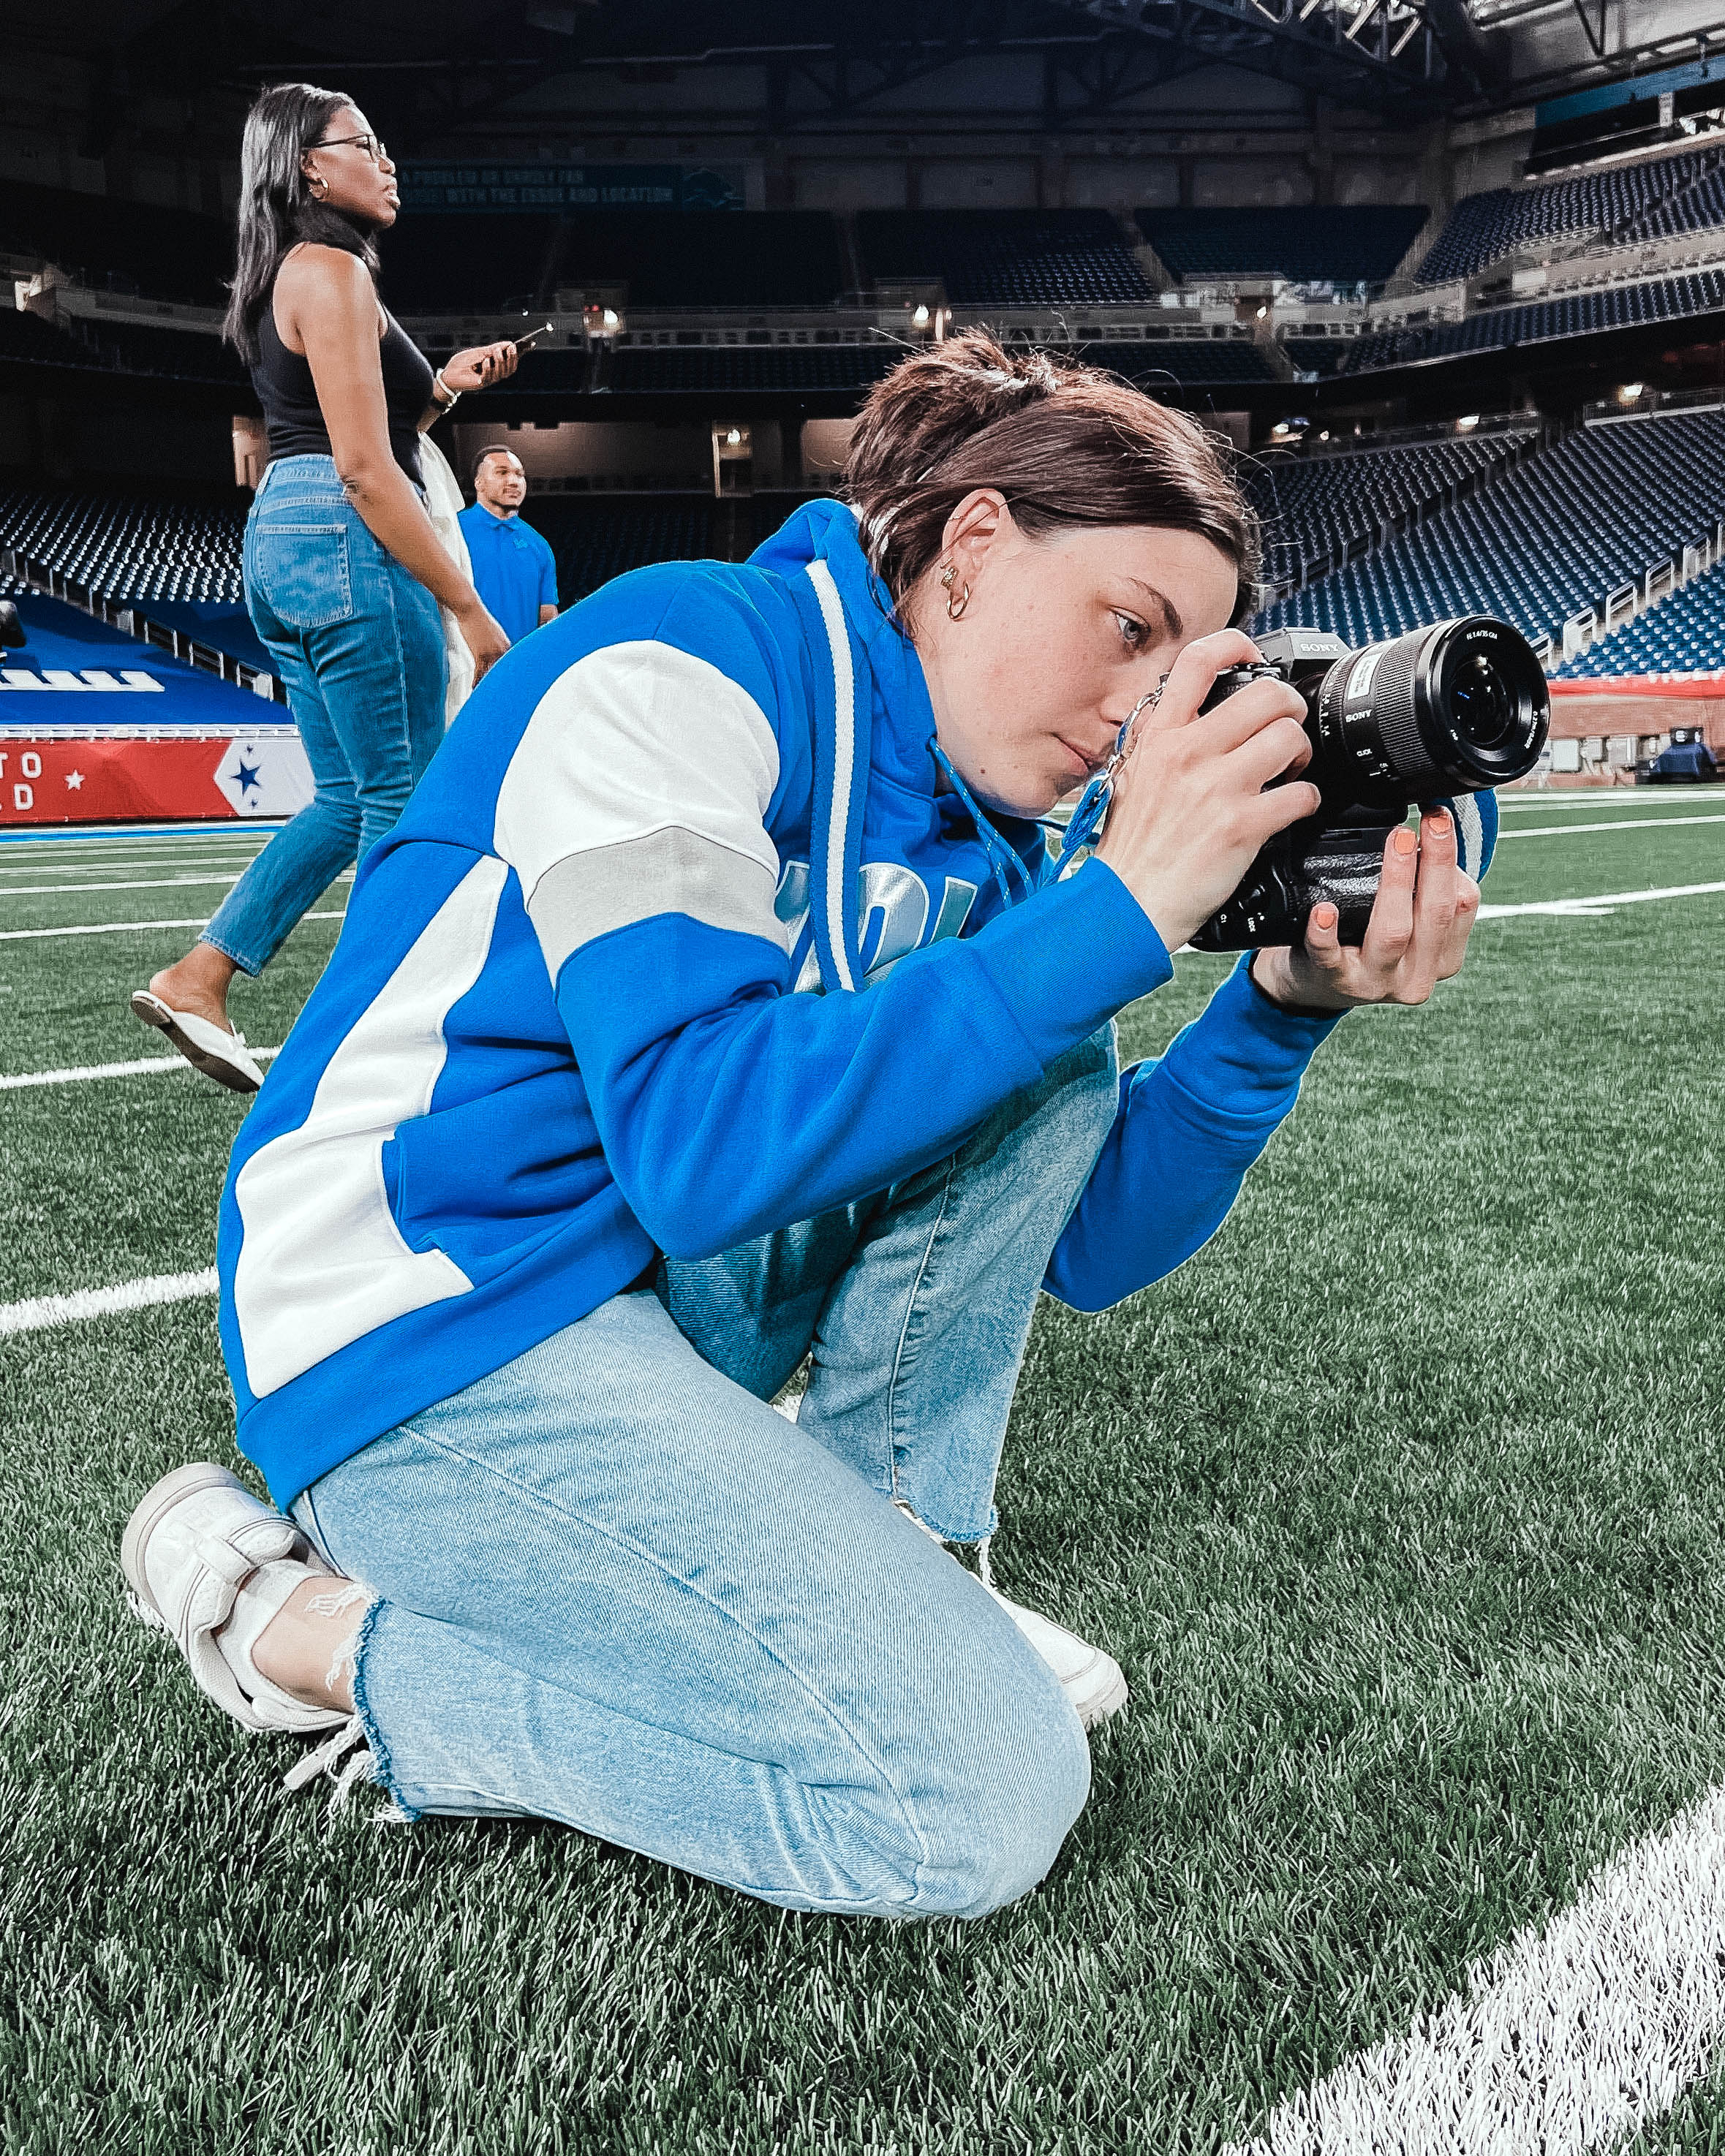 Katie Quinlan takes photos while on the field.